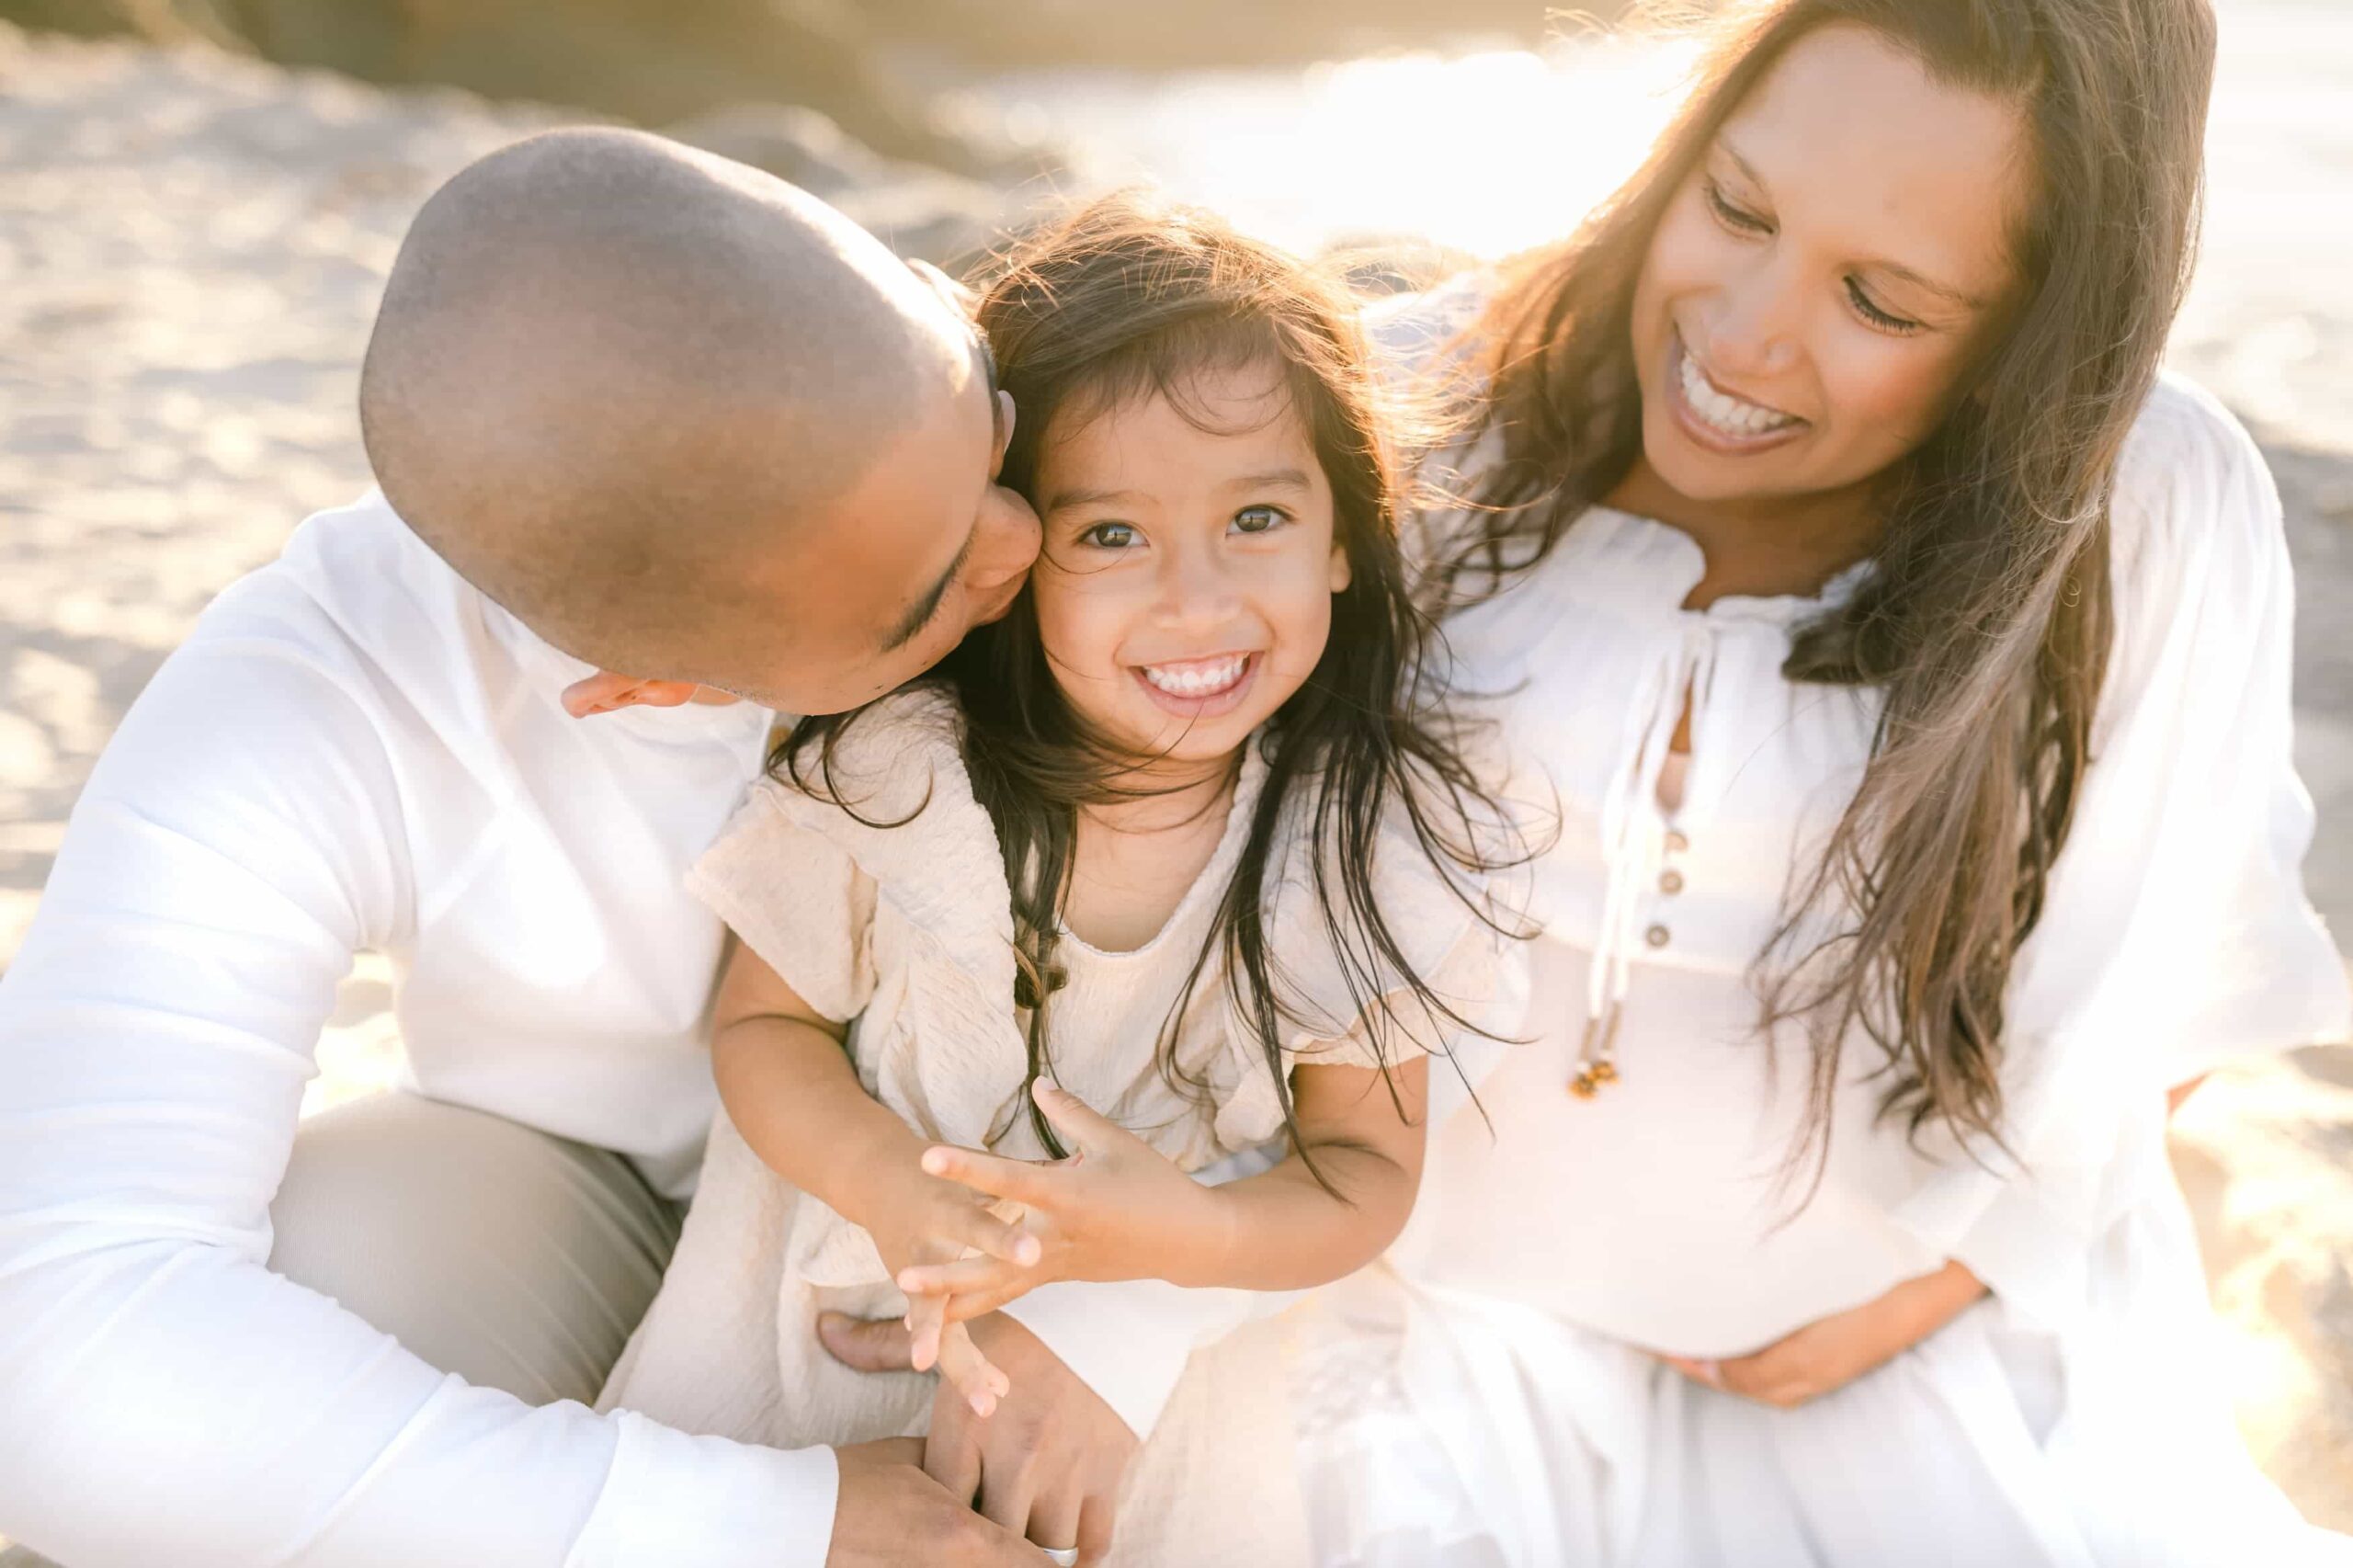 young daughter smiling while being held with family during photo shoot capturing milestones